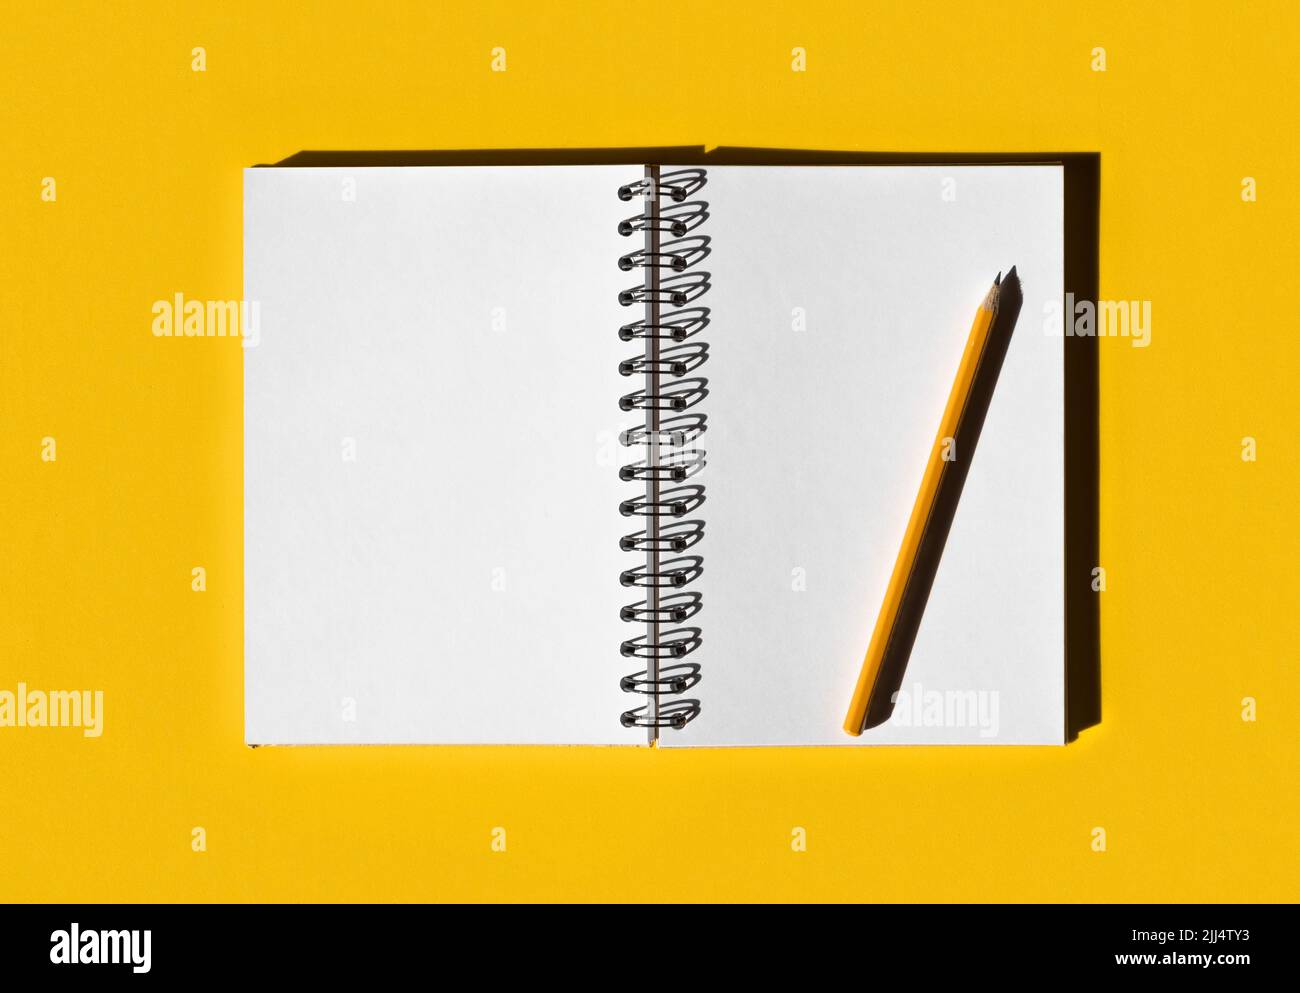 Notebook with pencil. School notebook on illuminated yellow background, spiral notepad on table. Top view of open notebook with blank pages Stock Photo